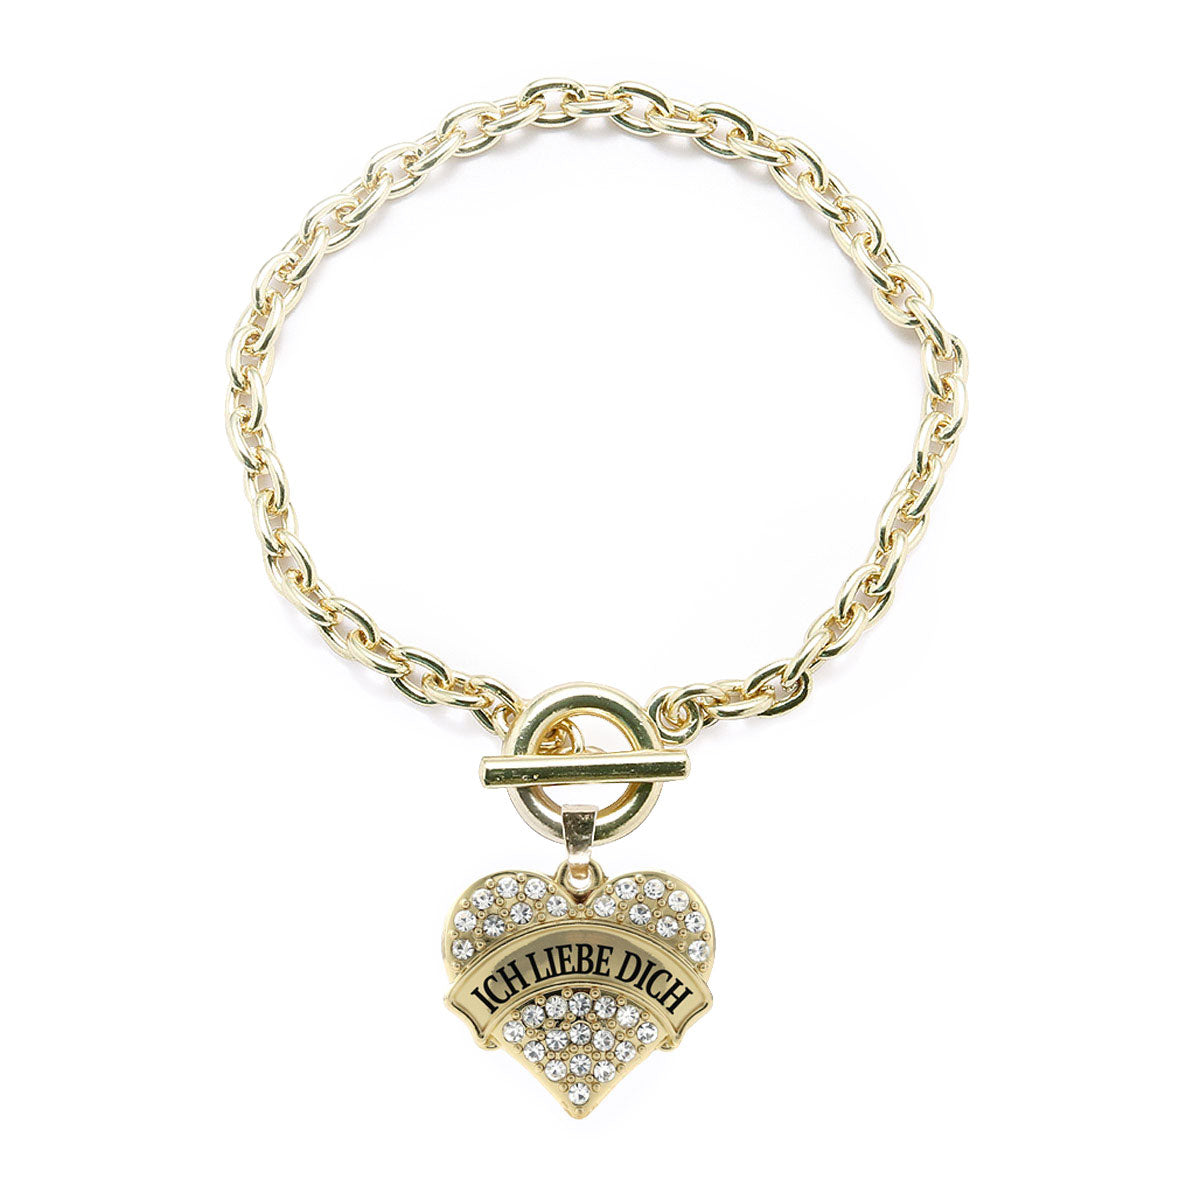 Gold Ich Liebe Dich Pave Heart Charm Toggle Bracelet